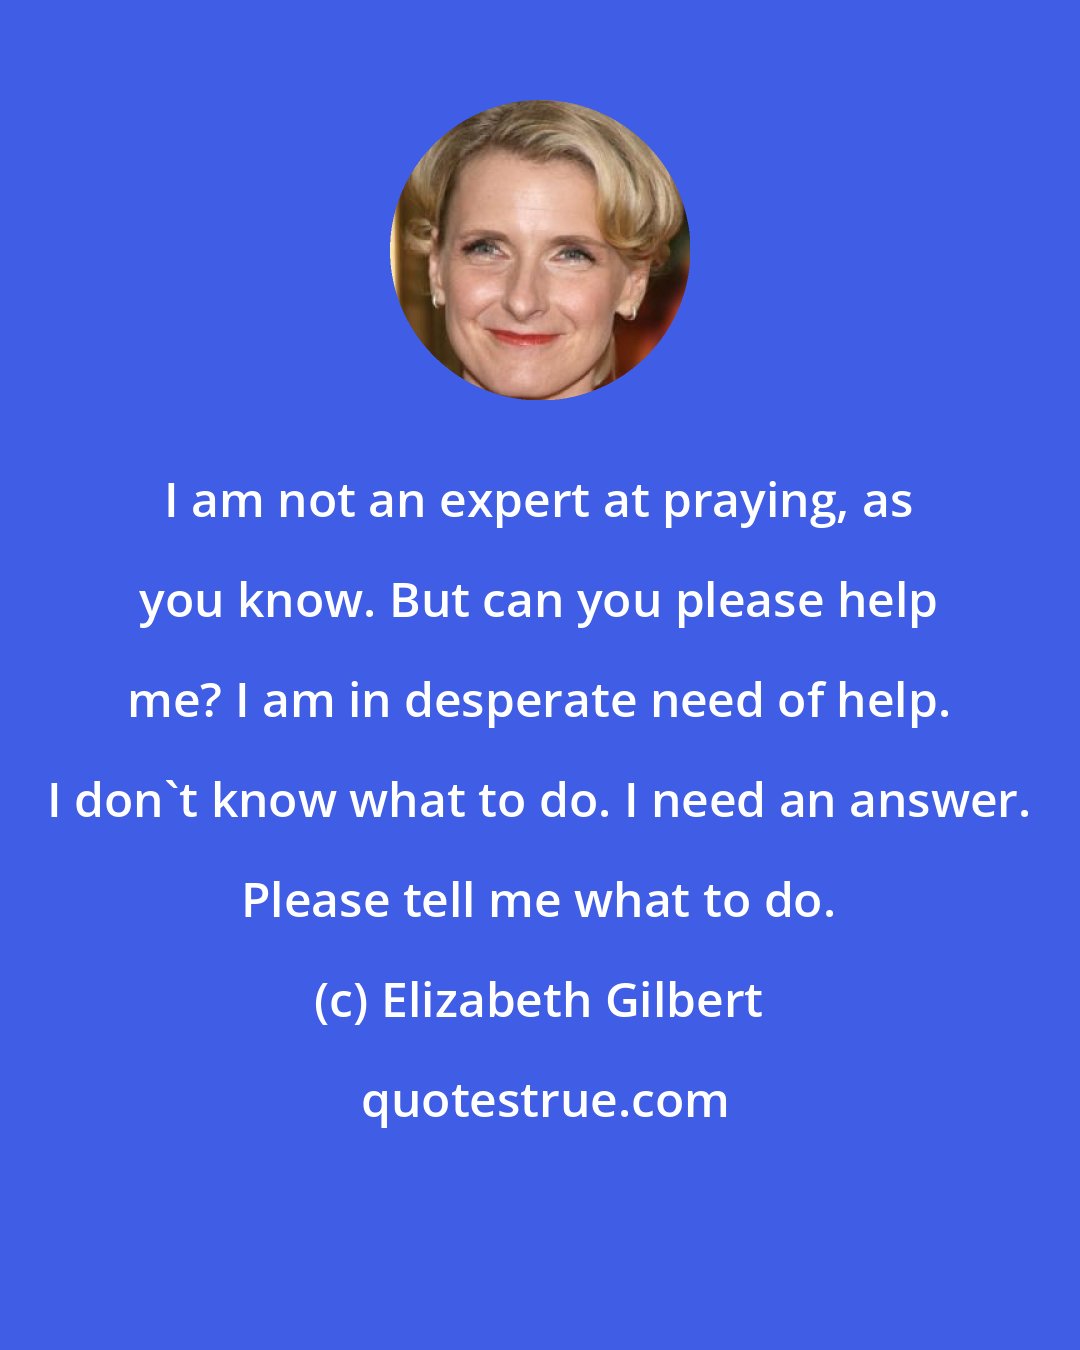 Elizabeth Gilbert: I am not an expert at praying, as you know. But can you please help me? I am in desperate need of help. I don't know what to do. I need an answer. Please tell me what to do.